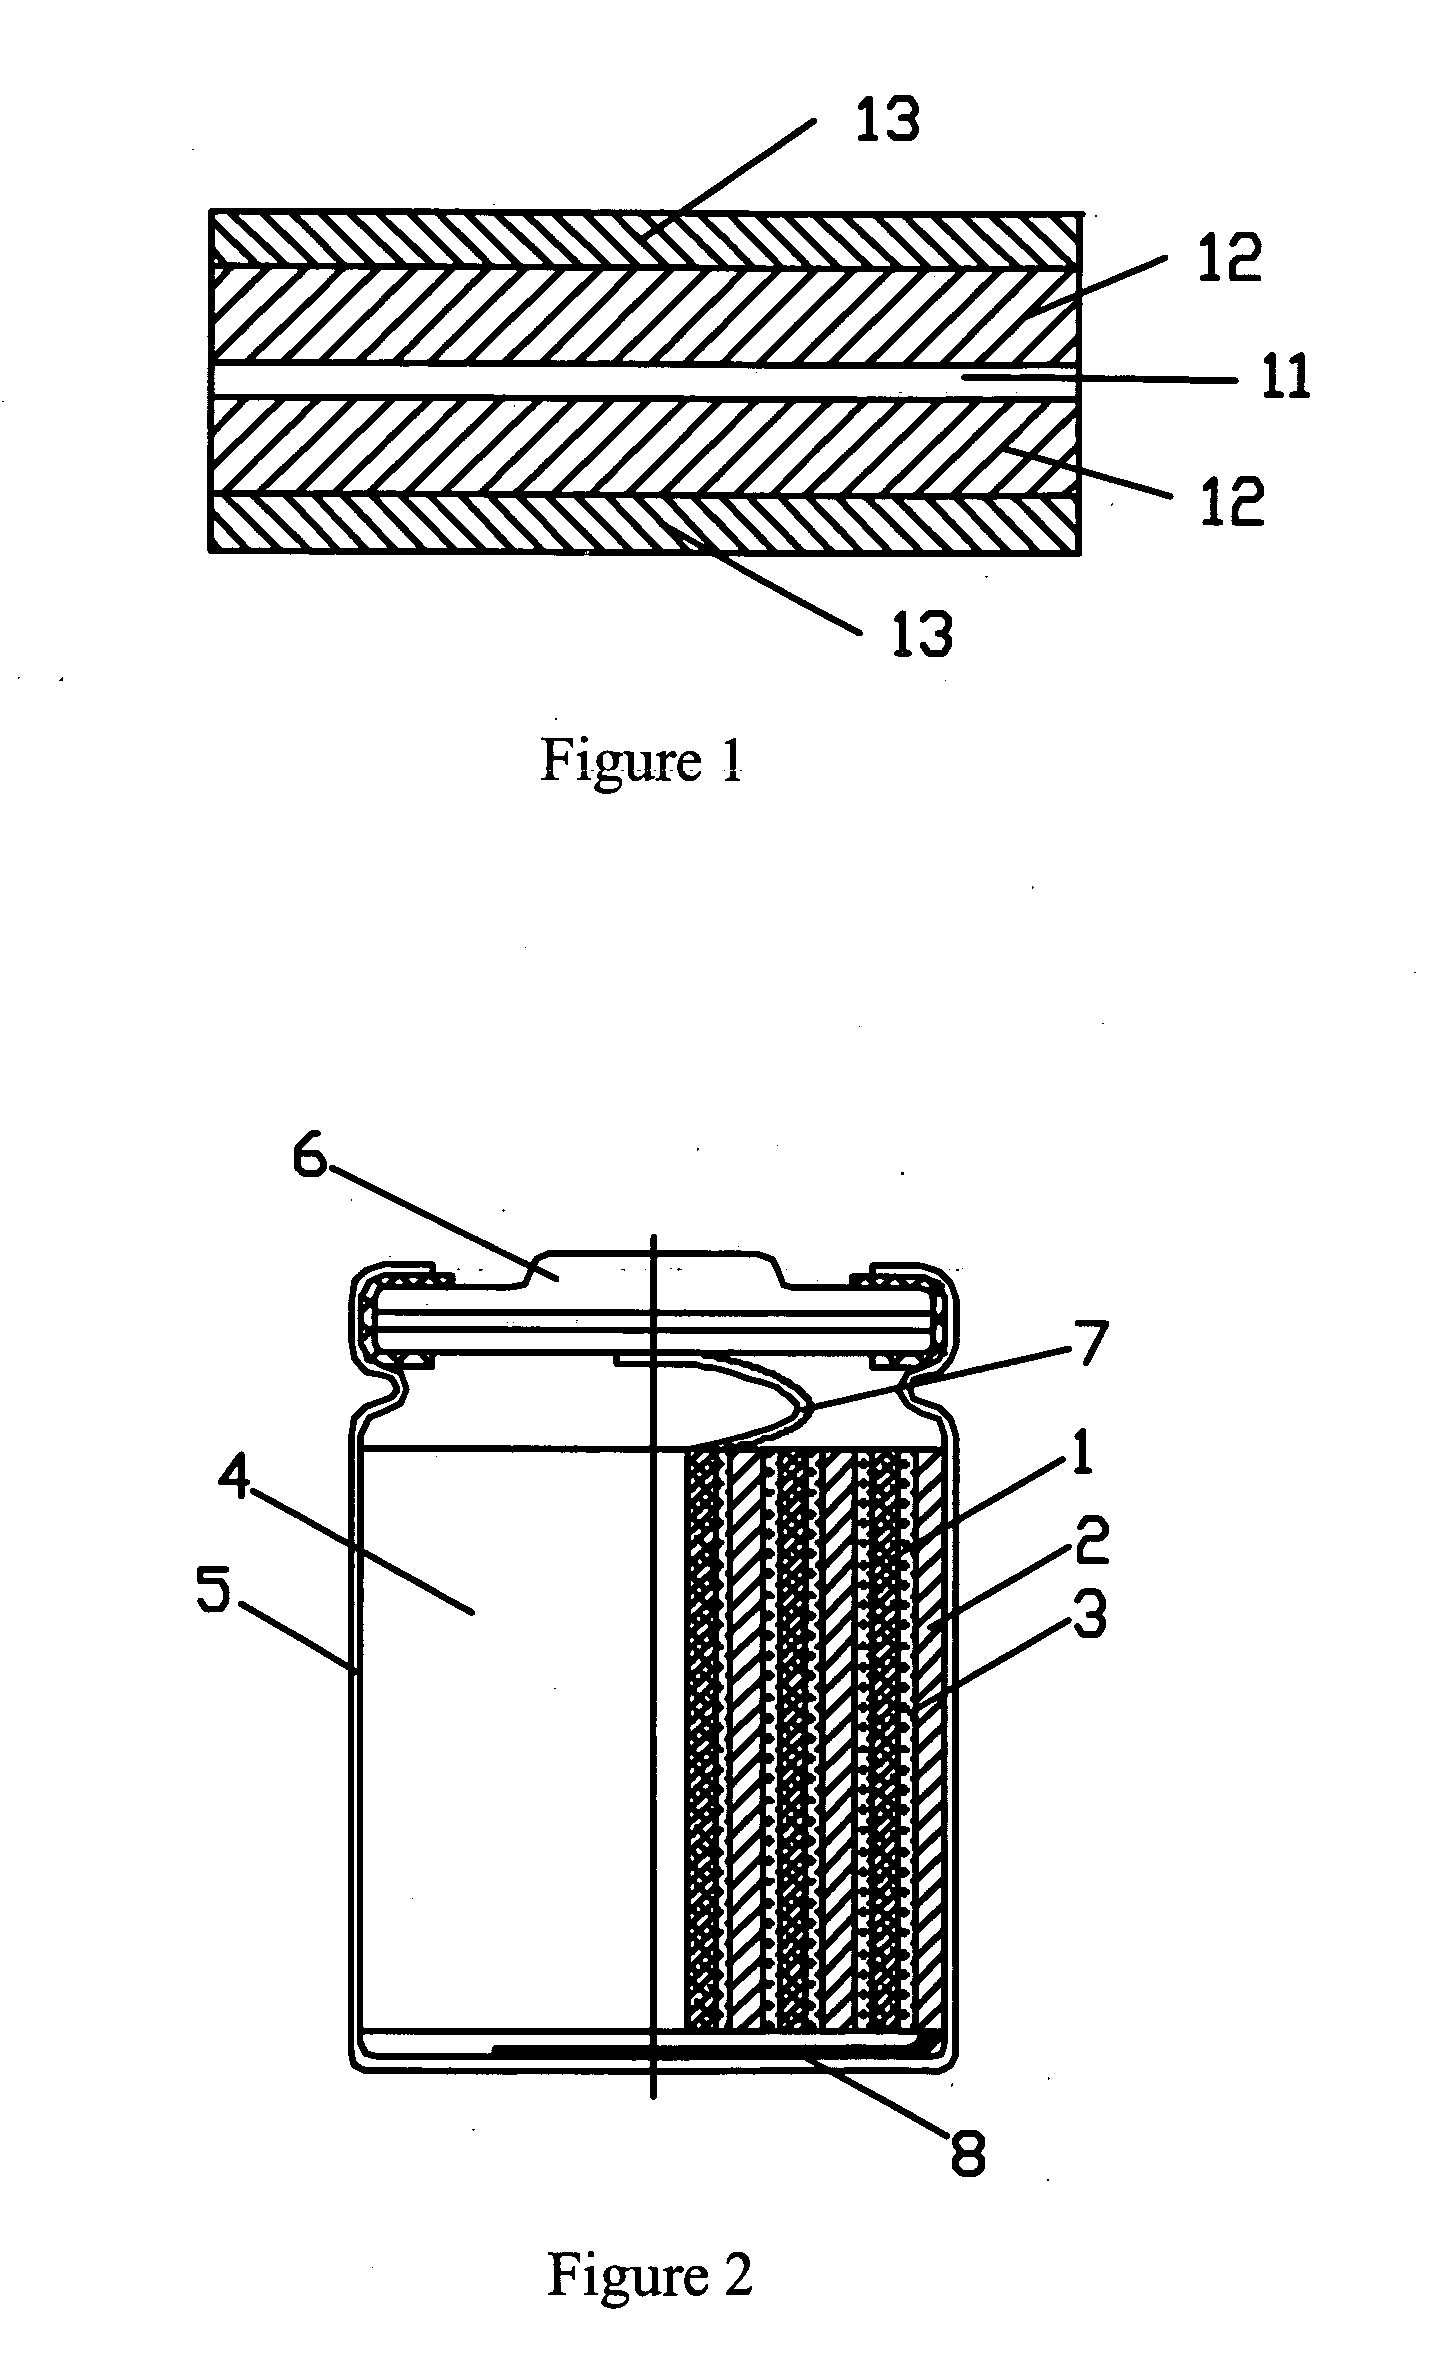 Positive electrodes for lithium batteries and their methods of fabrication